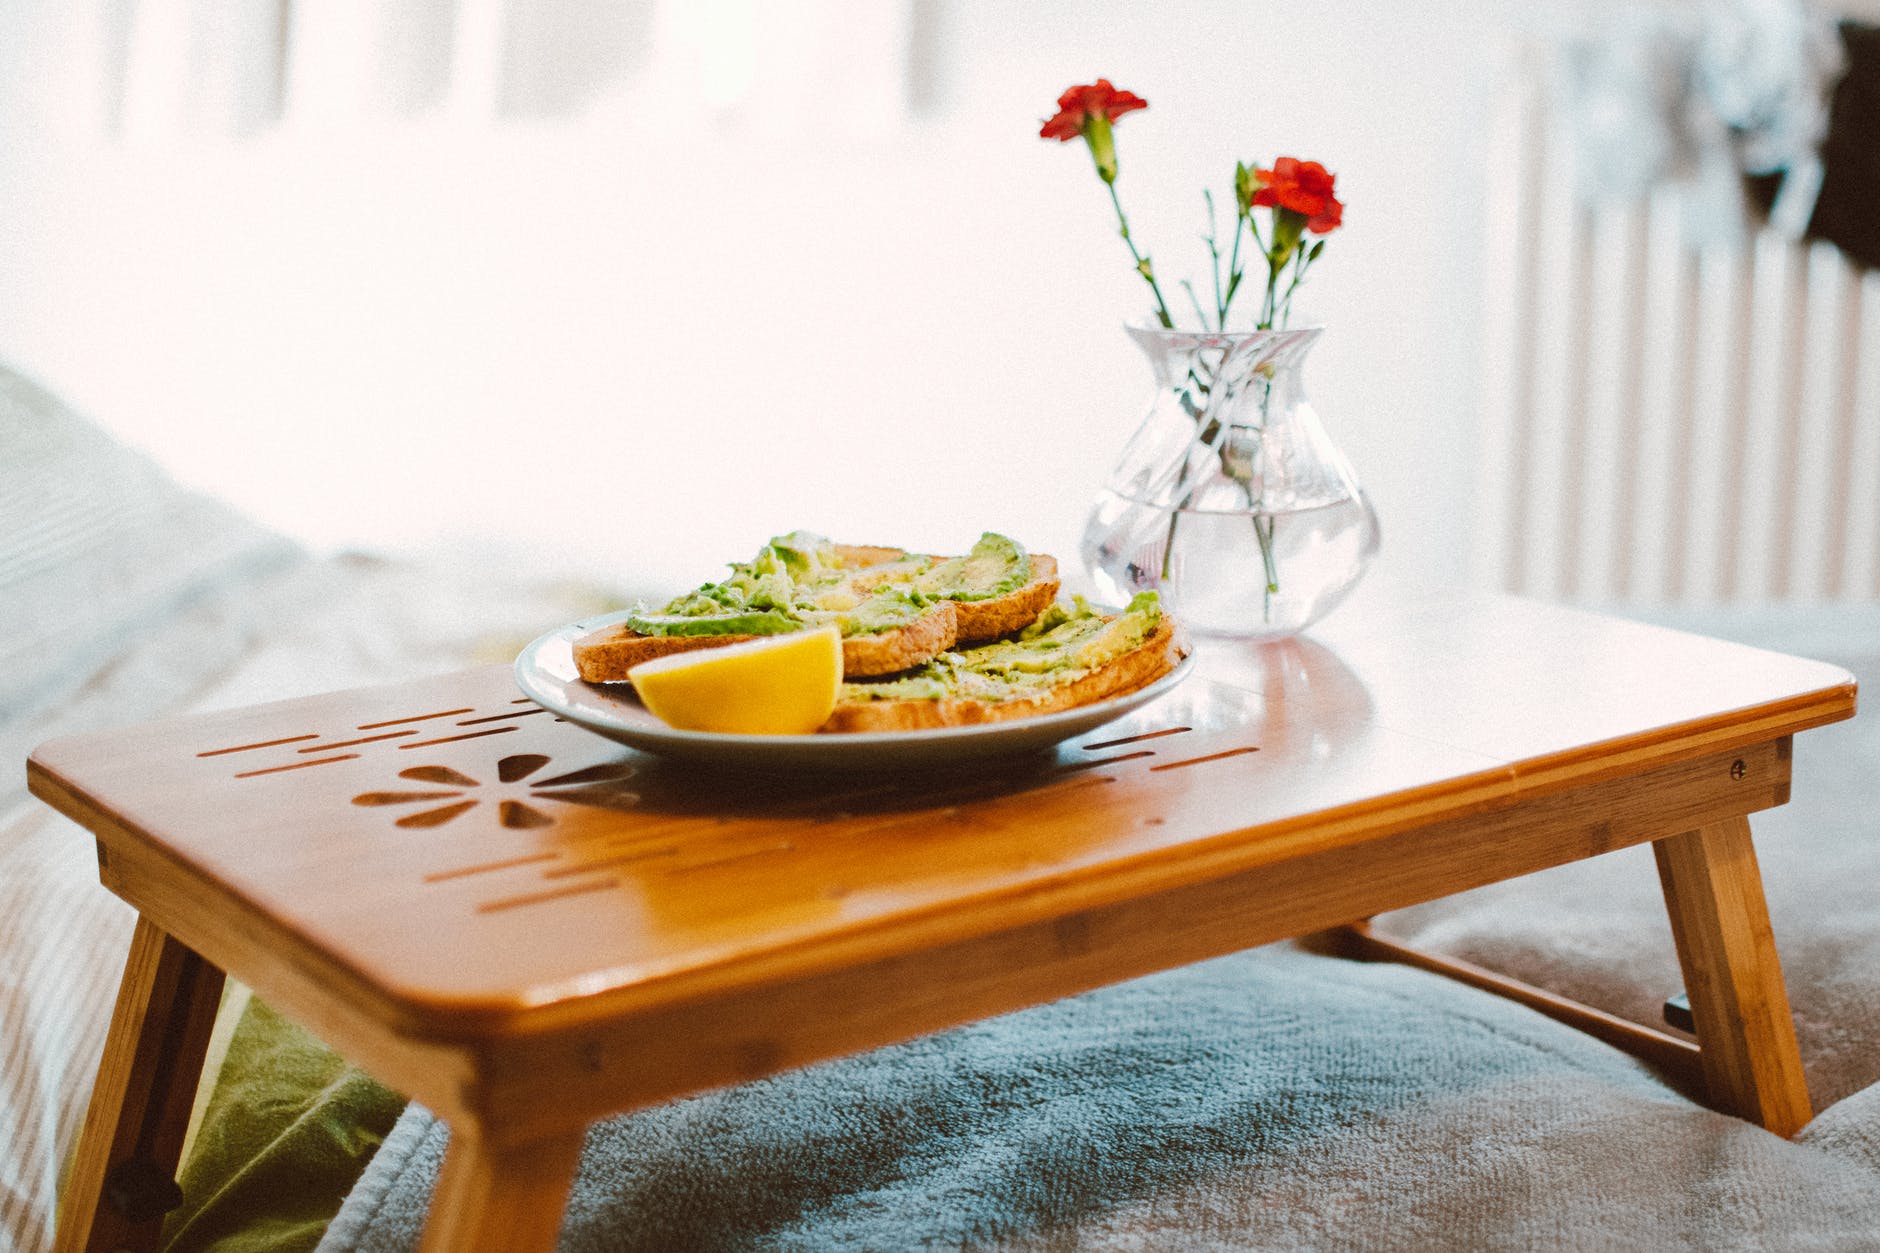 Breakfast in bed, avocado on toast served on wooden tray with vase of flowers 